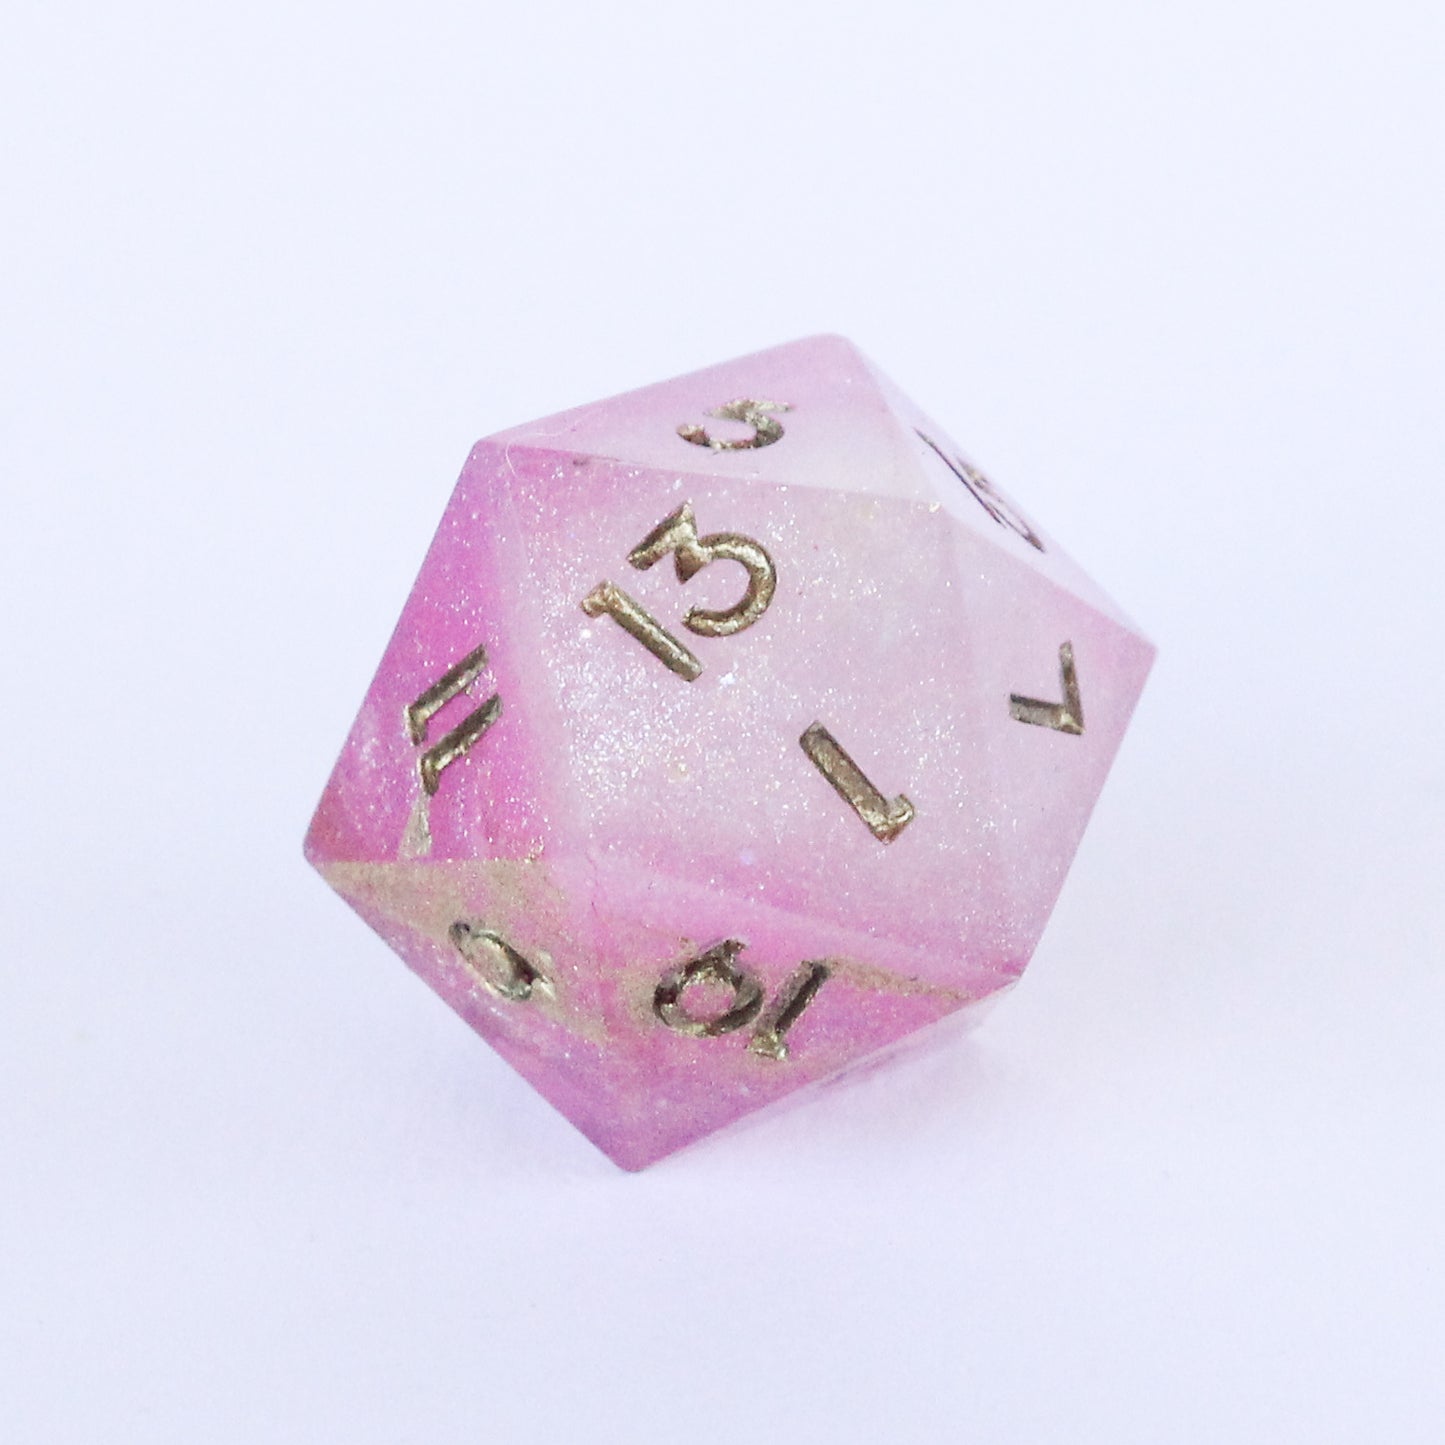 Augury in Pink - Single d20